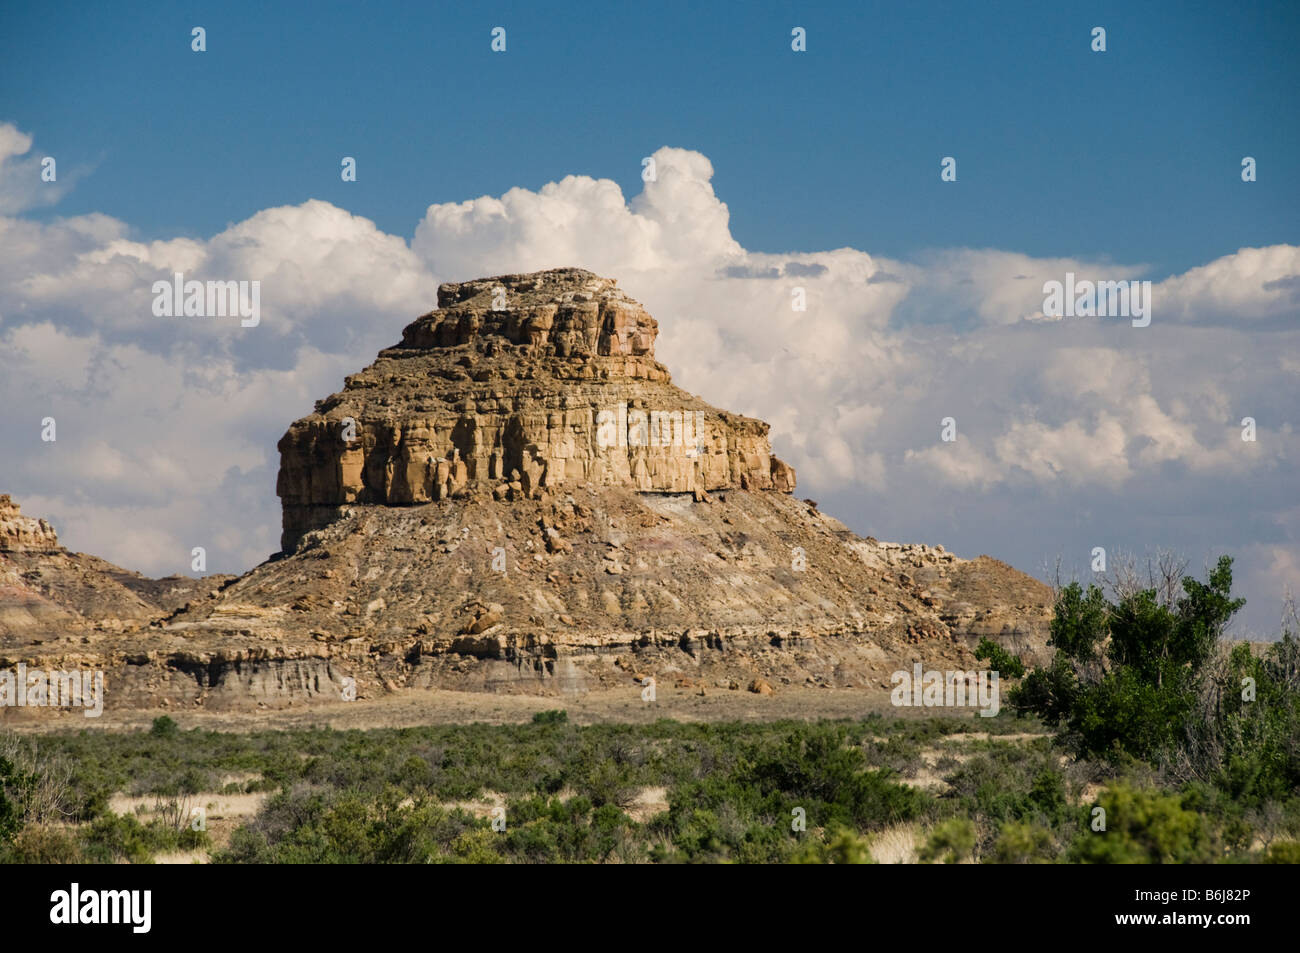 Fajada Butte at Chaco Culture National Historical Park New Mexico Stock Photo